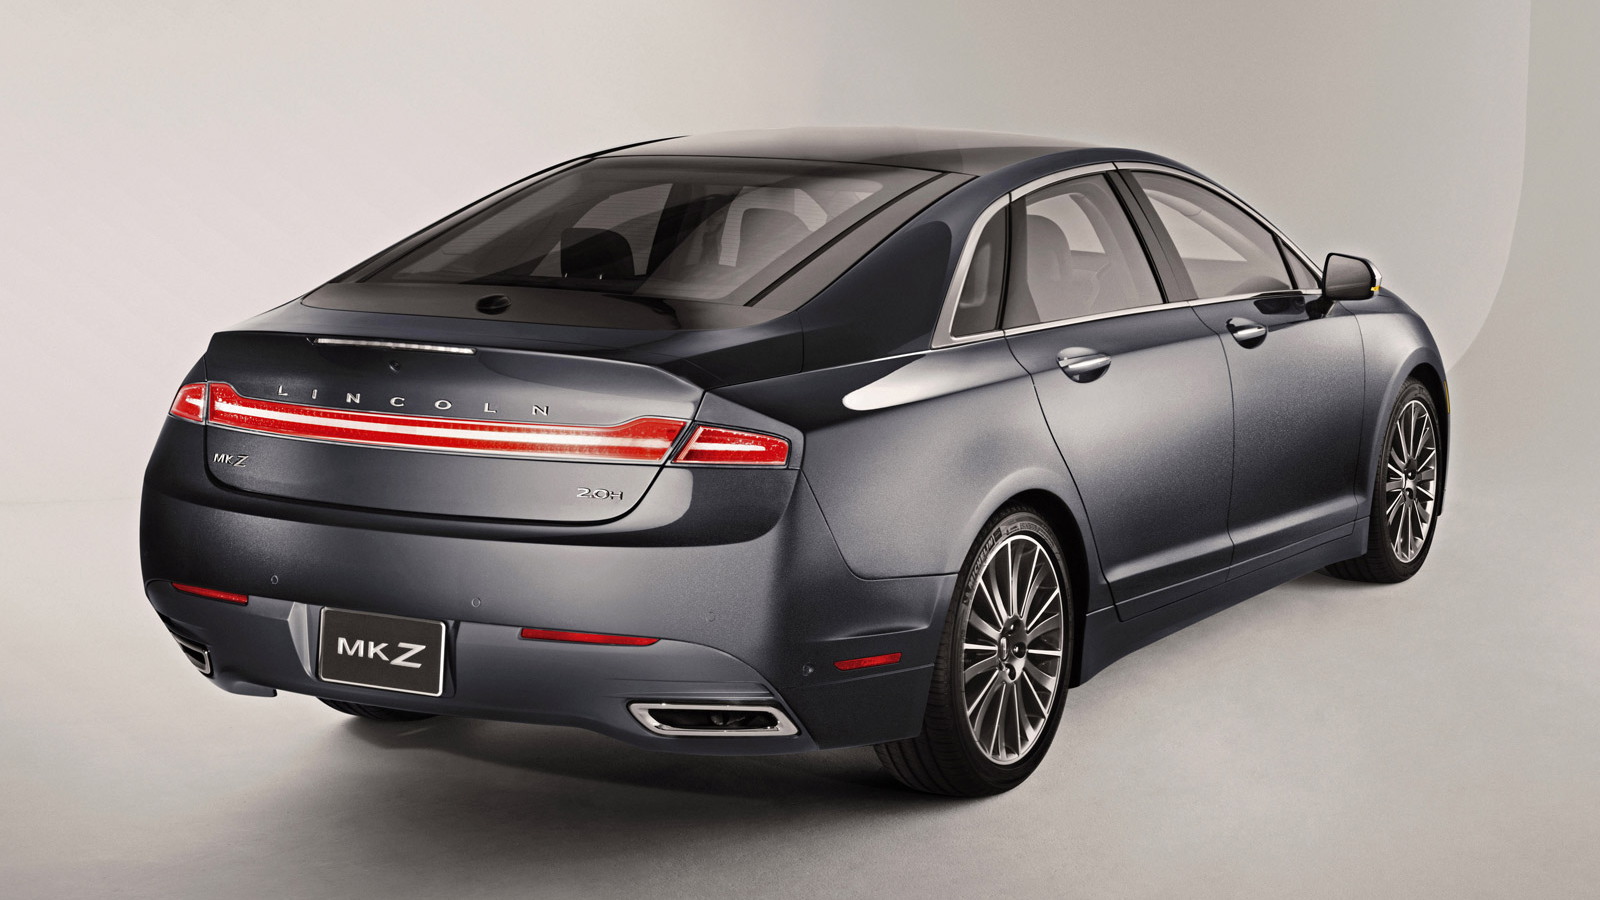 2013 Lincoln MKZ Hybrid Rated At 45 MPG Combined By EPA